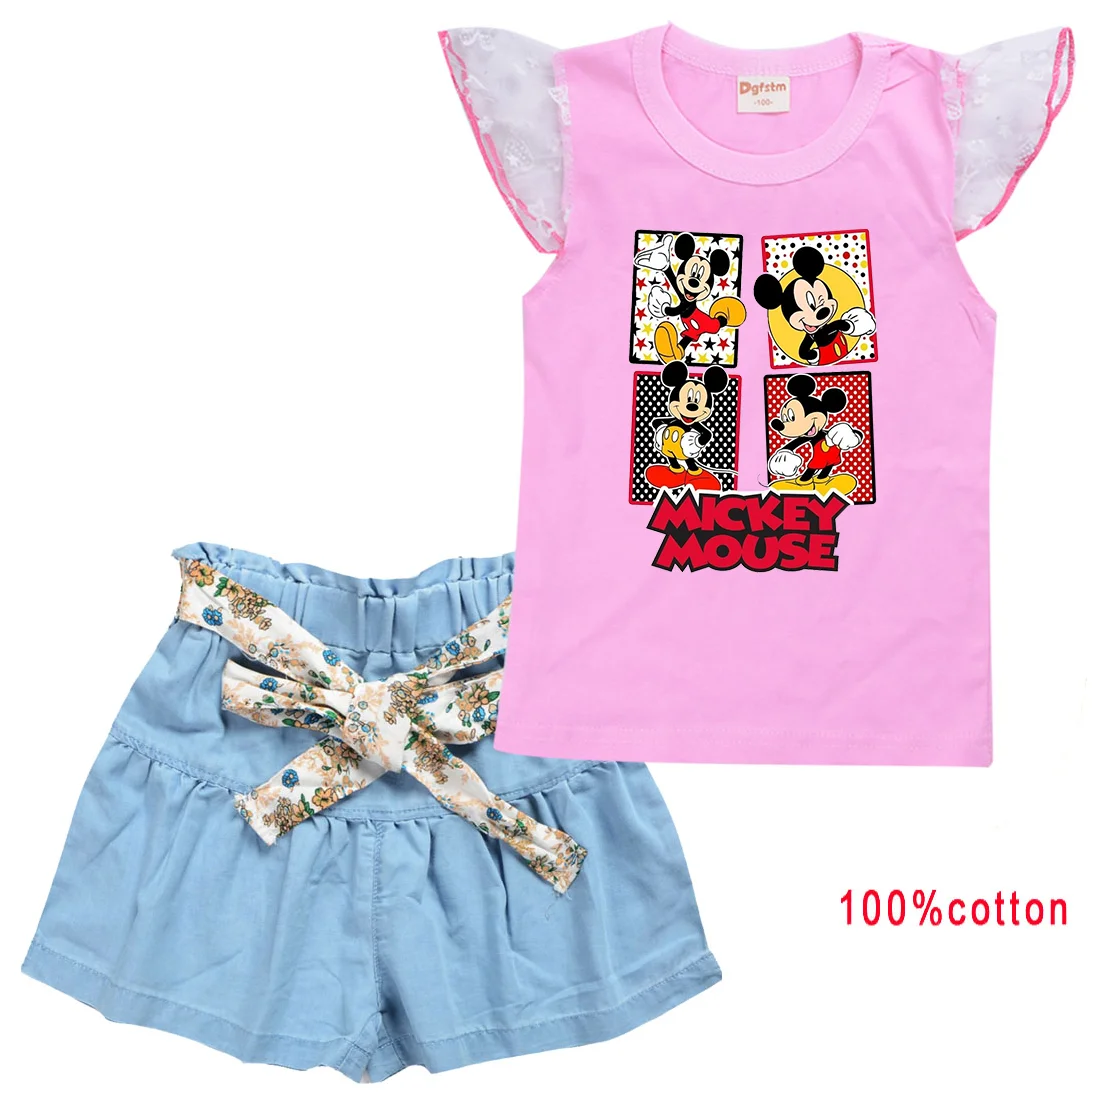 

2pc/Sets Disney Mickey Minnie Mouse Girls Clothing Outfits Summer T-shirt Shorts Clothes Casual Sports Tracksuits